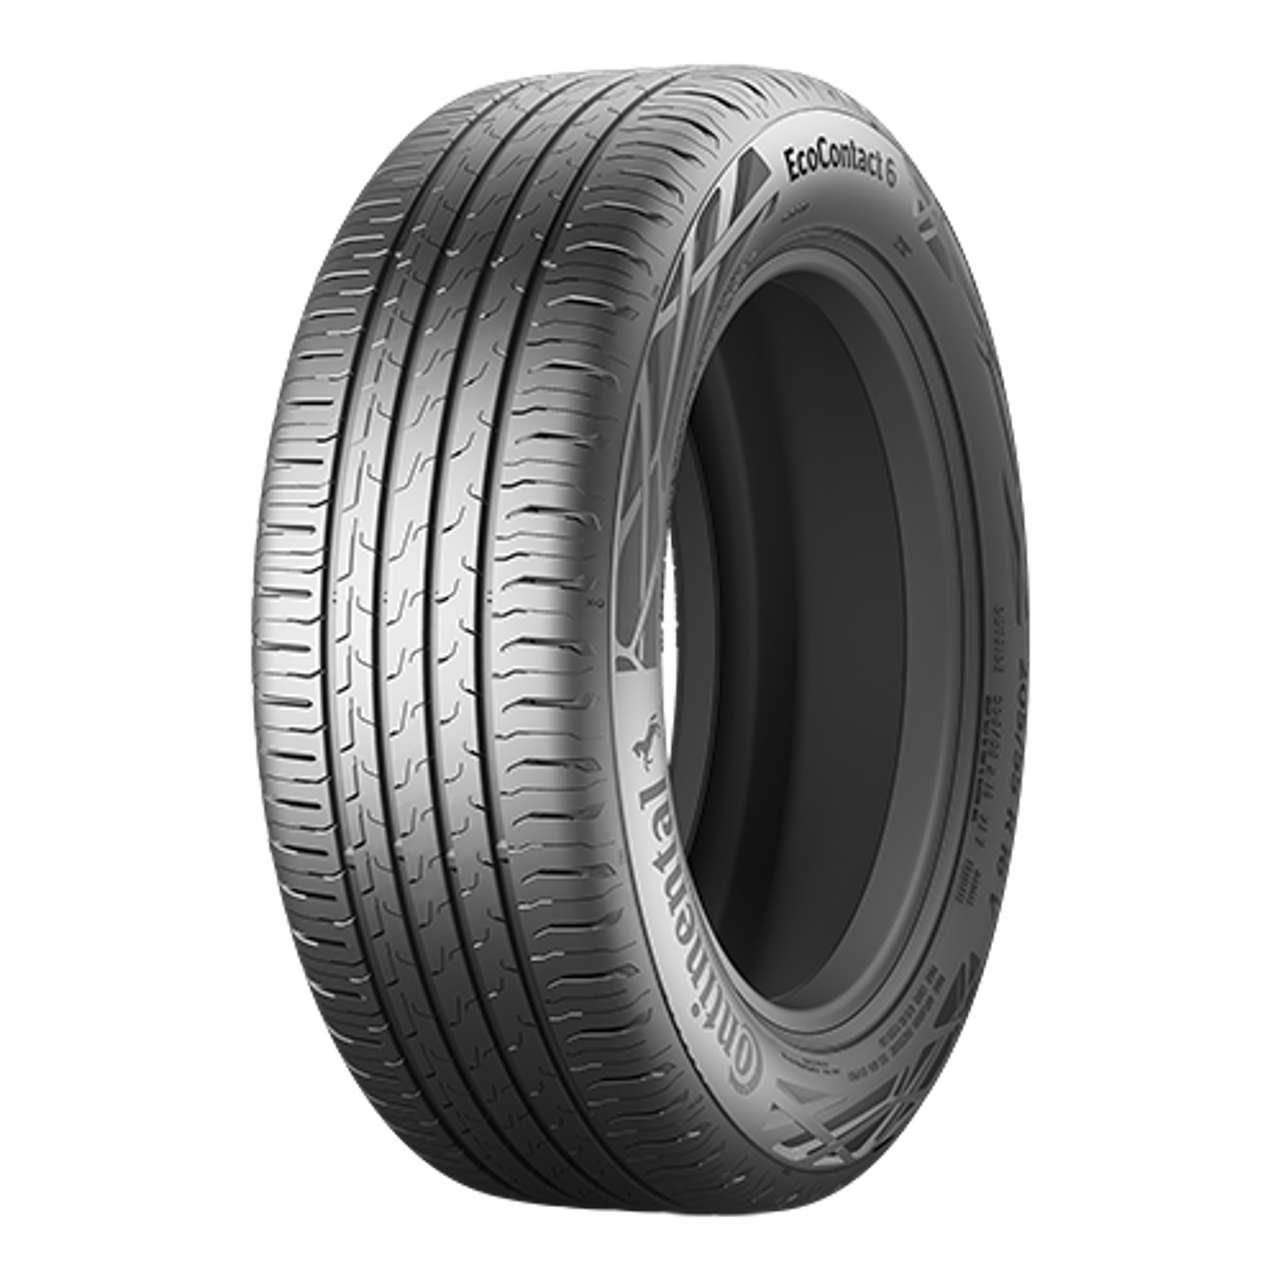 CONTINENTAL ECOCONTACT 6 (EVc) 225/45R17 94V